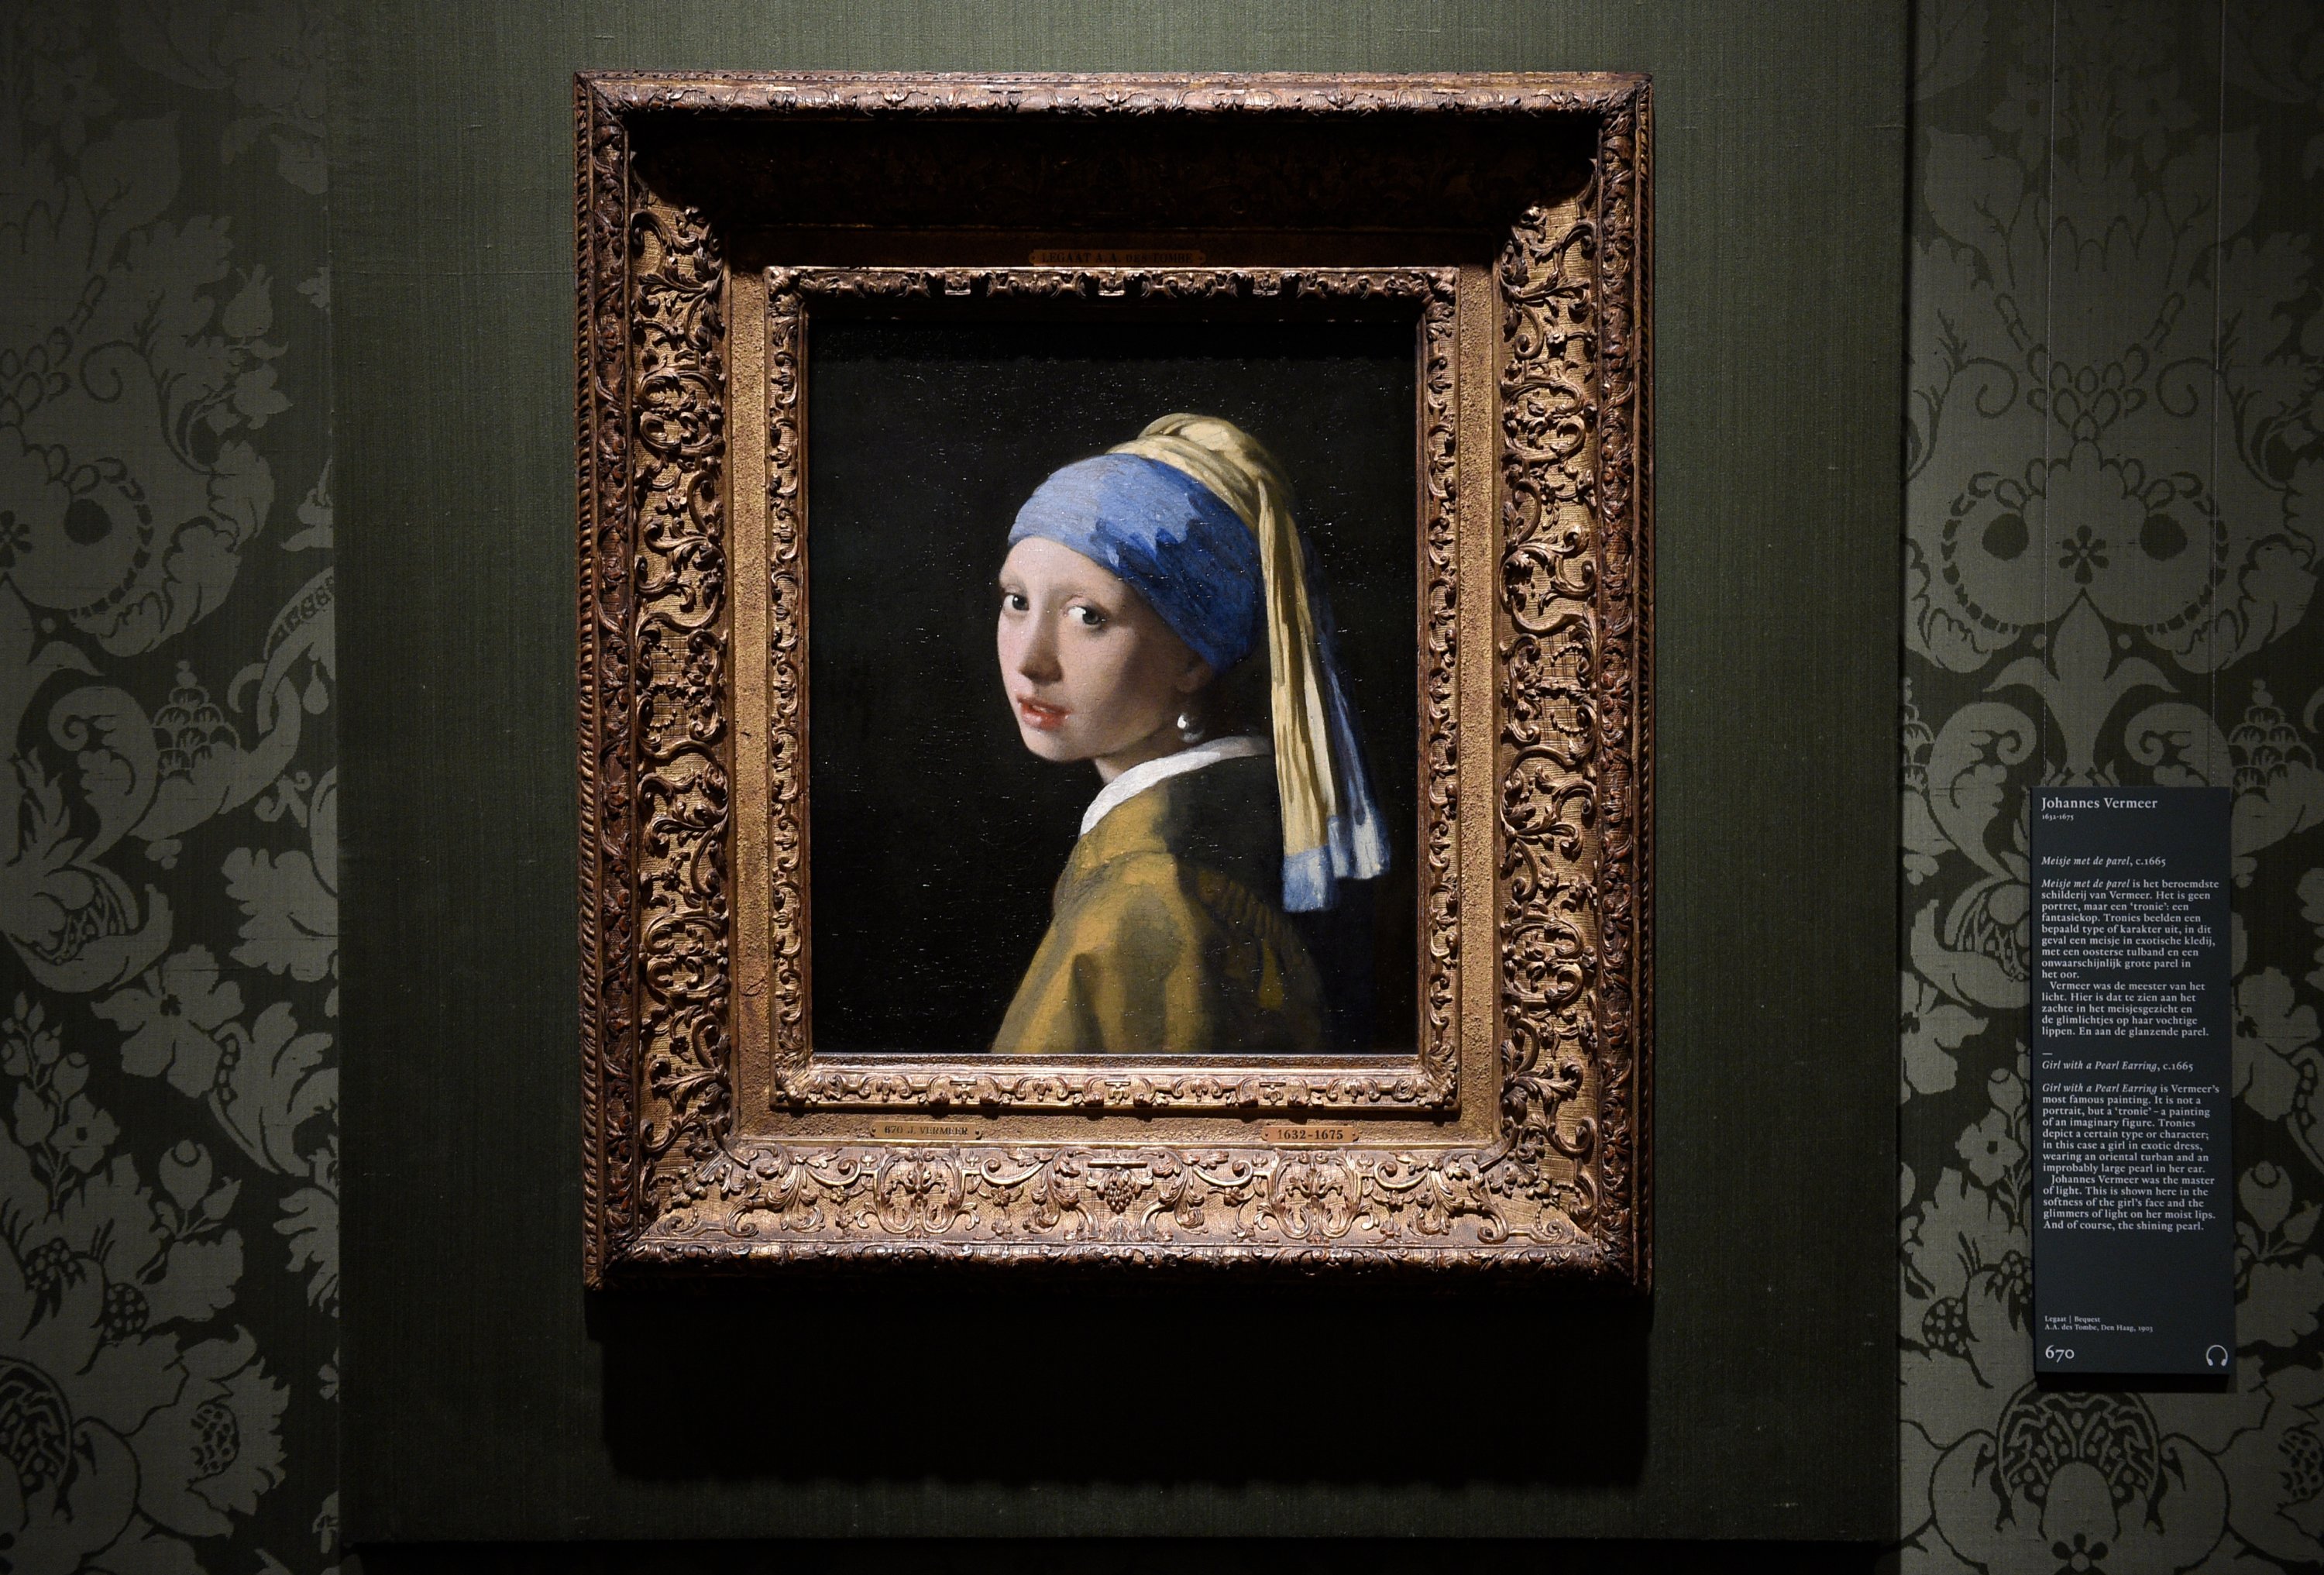 Johannes Vermeer, The Girl with a Pearl Earring, 1665, Mauritshuis, The Hague, Netherlands. 